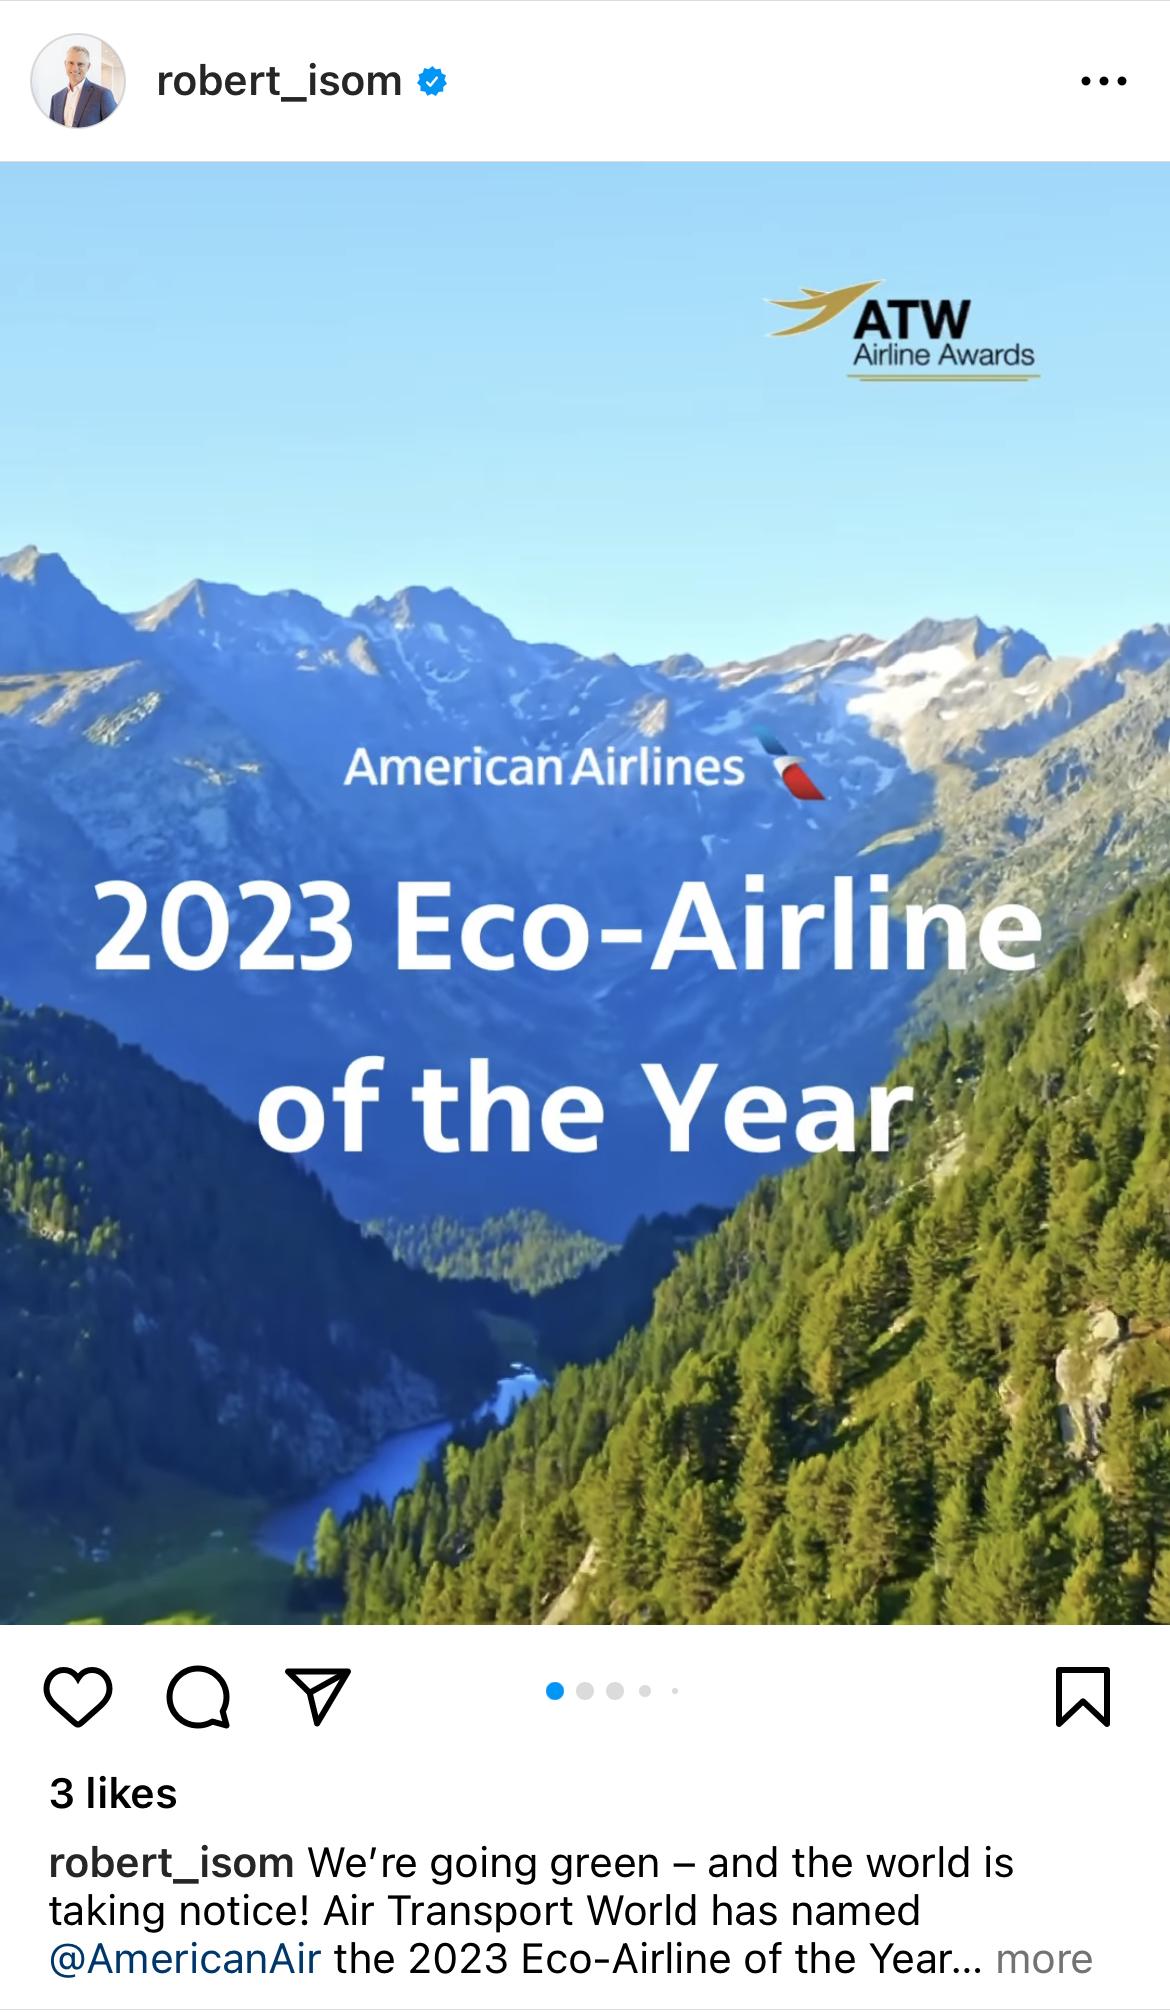 screengrab of a twitter post from robert_isom. Image is of forested mountains and American Airlines logo with 2023 Eco-Airline of the year.